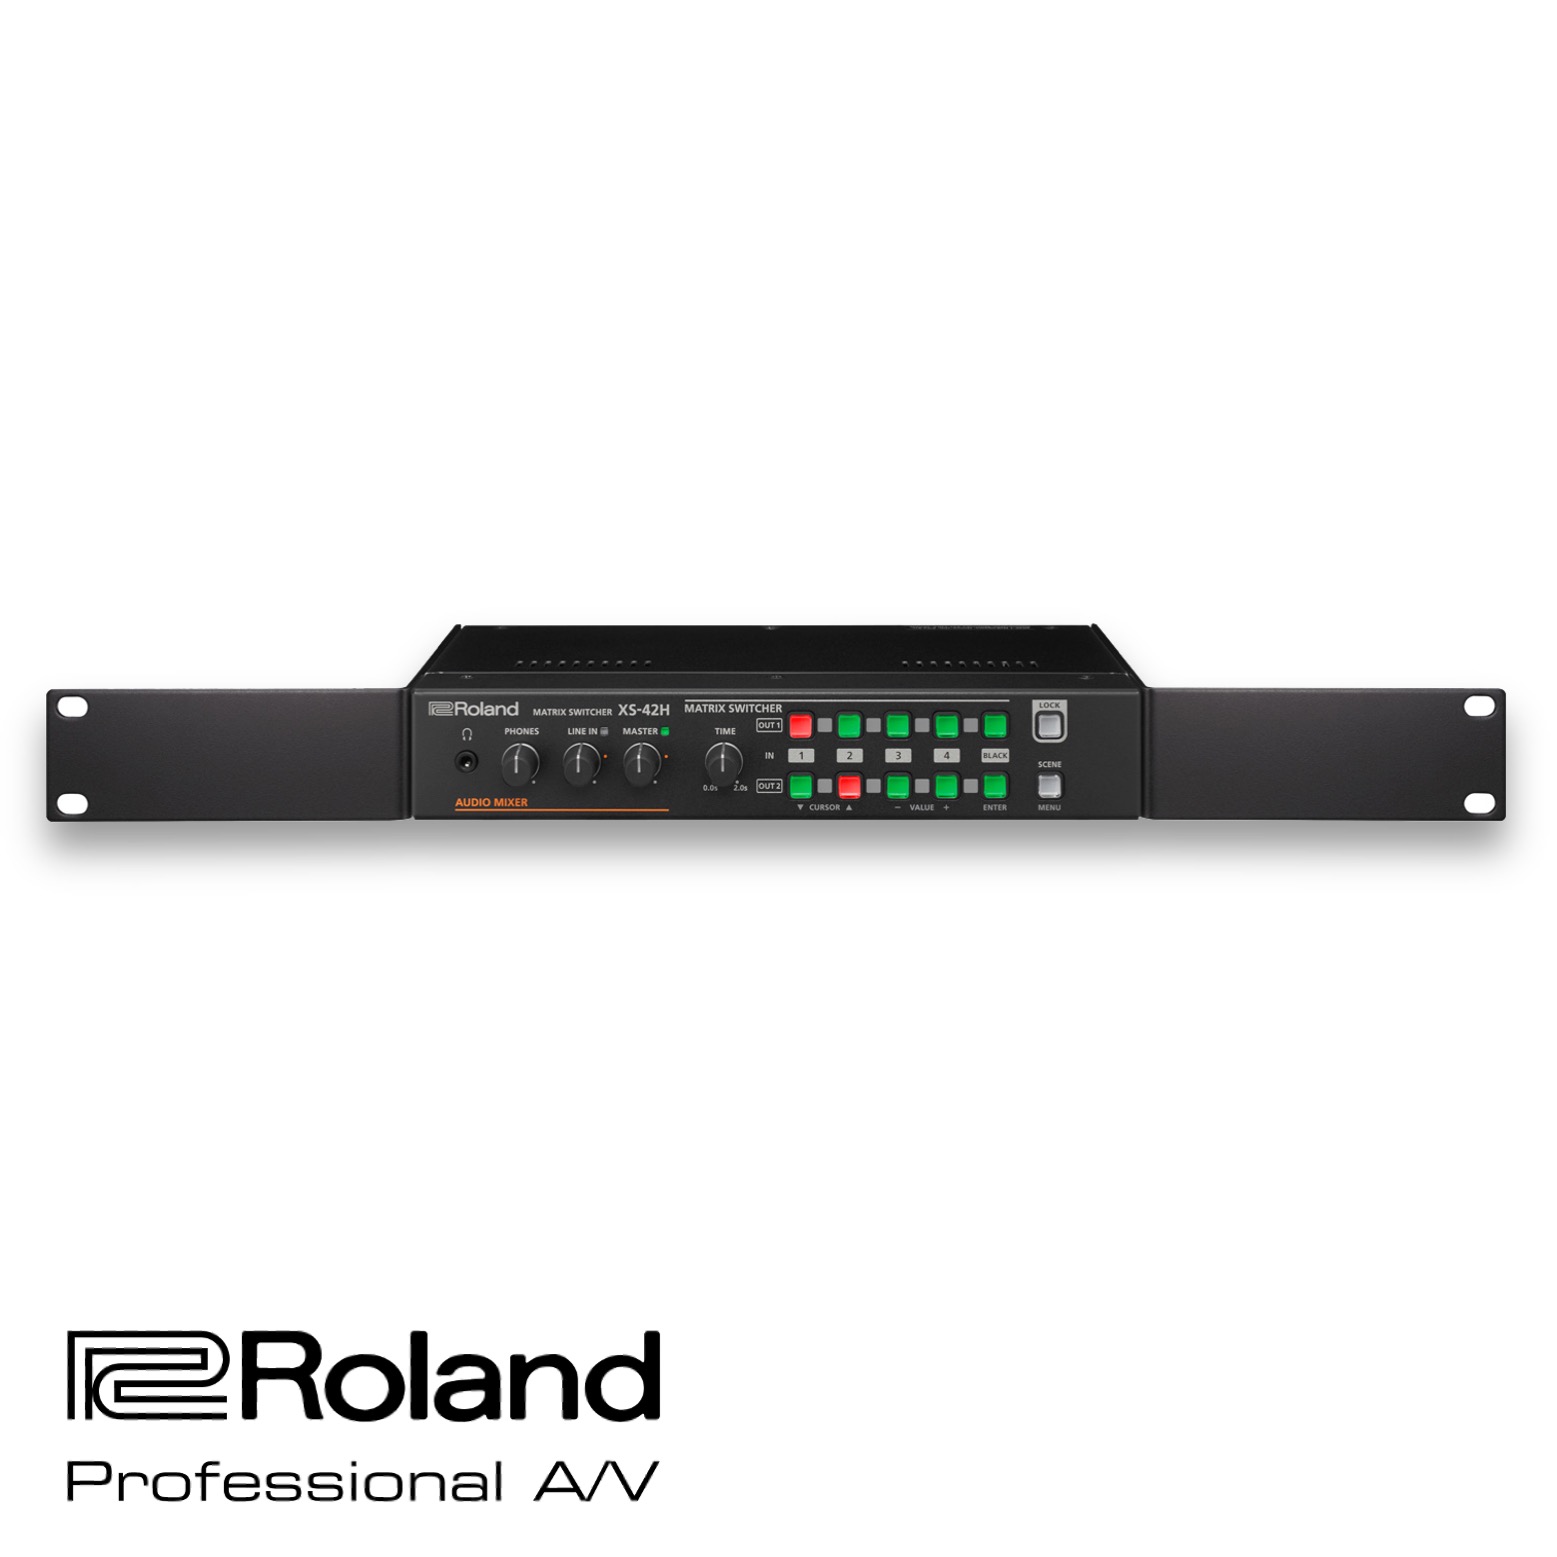 Roland XS-83H 8x3 Multi-Format Matrix Switch: HDMI or HDBaseT Out